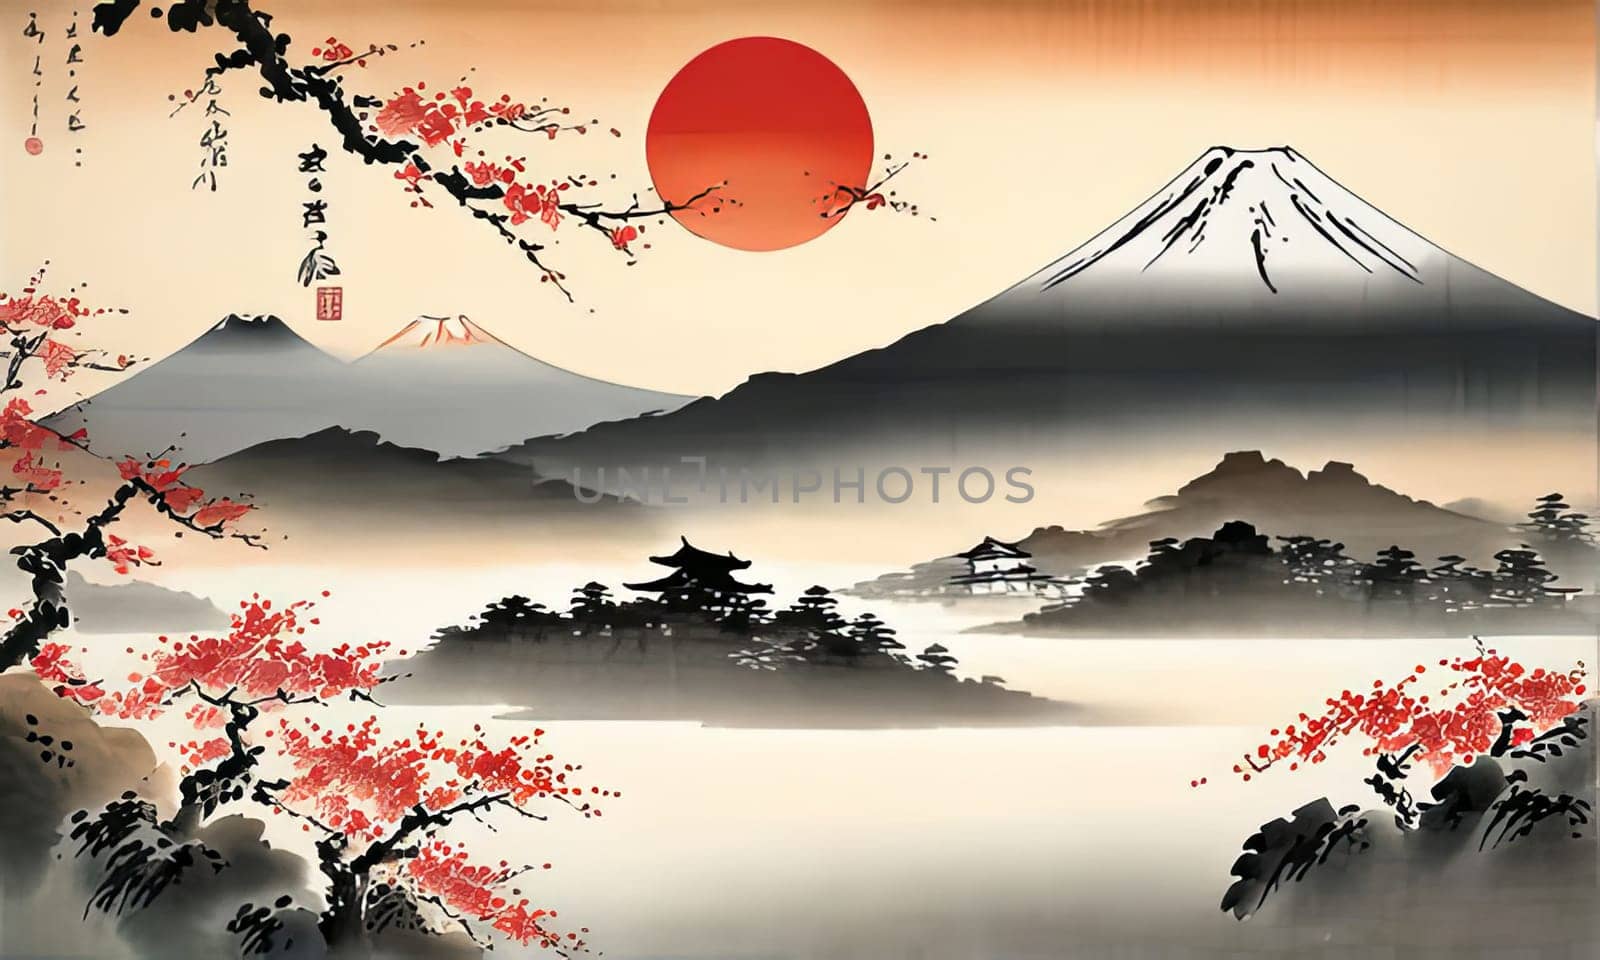 Japanese mountain landscape adorned with delicate cherry blossoms, capturing essence of tranquility, beauty. For interior, commercial spaces to create stylish atmosphere, print